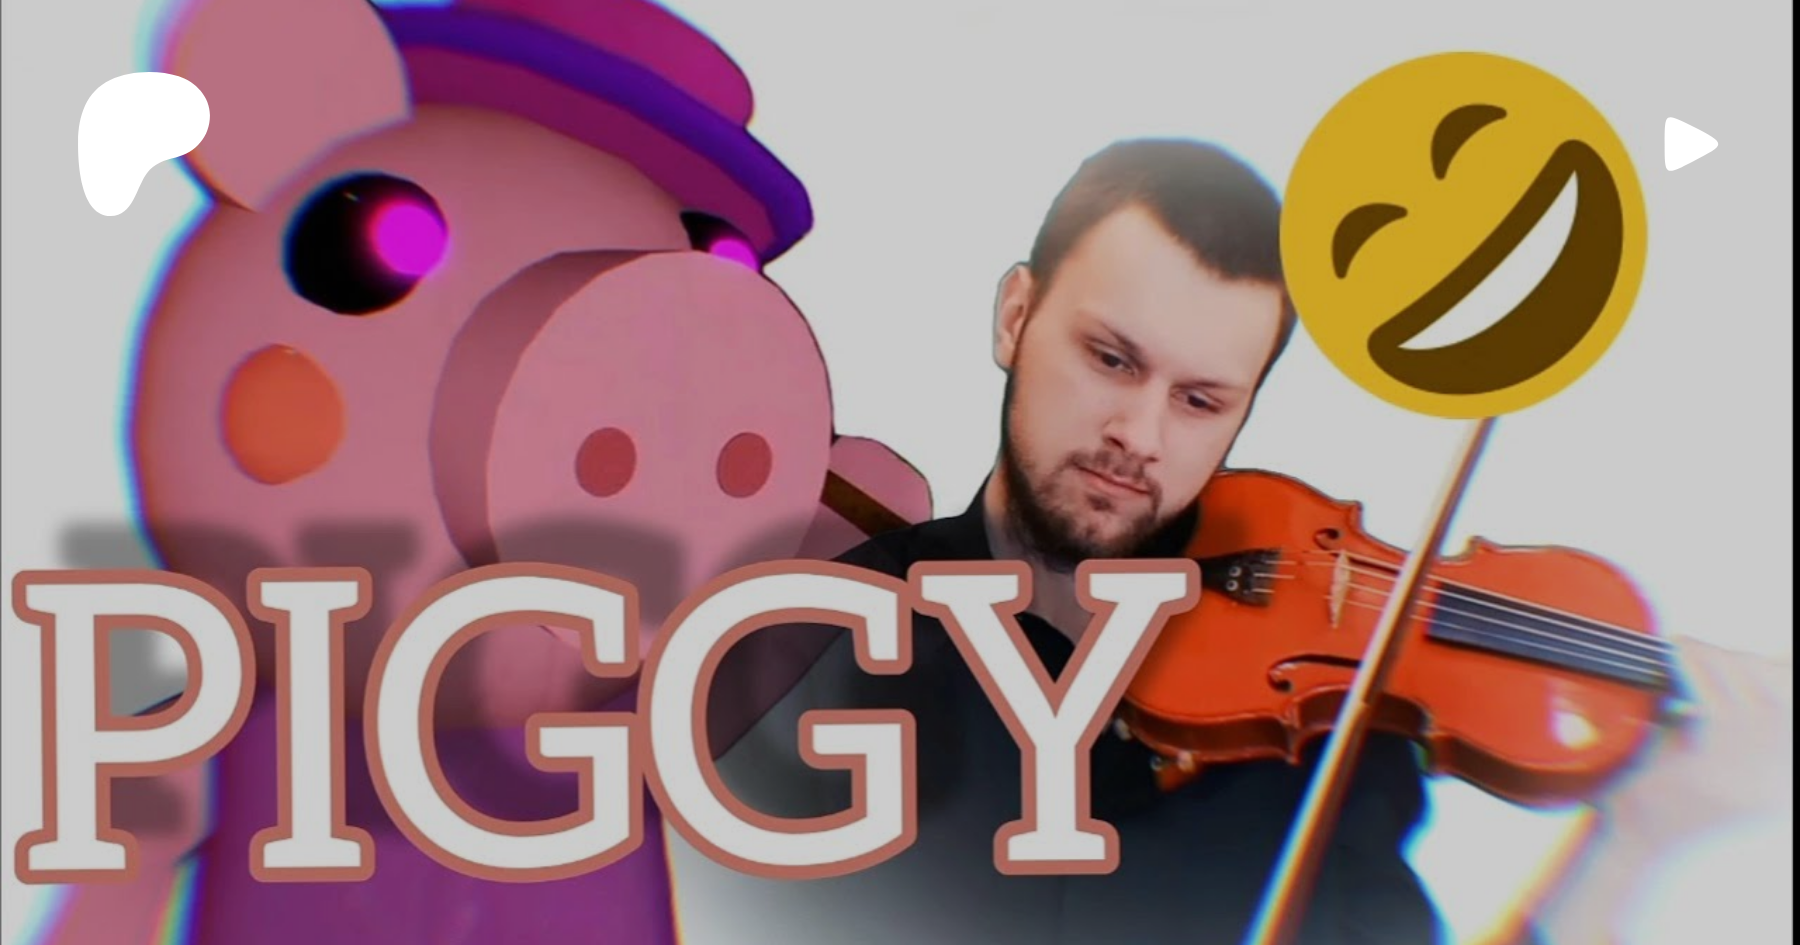 Piggy Roblox Grandmother Theme Soundtrack Music Song On Violin Piano Sheet Music Musicbyby On Patreon - piggy roblox piano sheet music